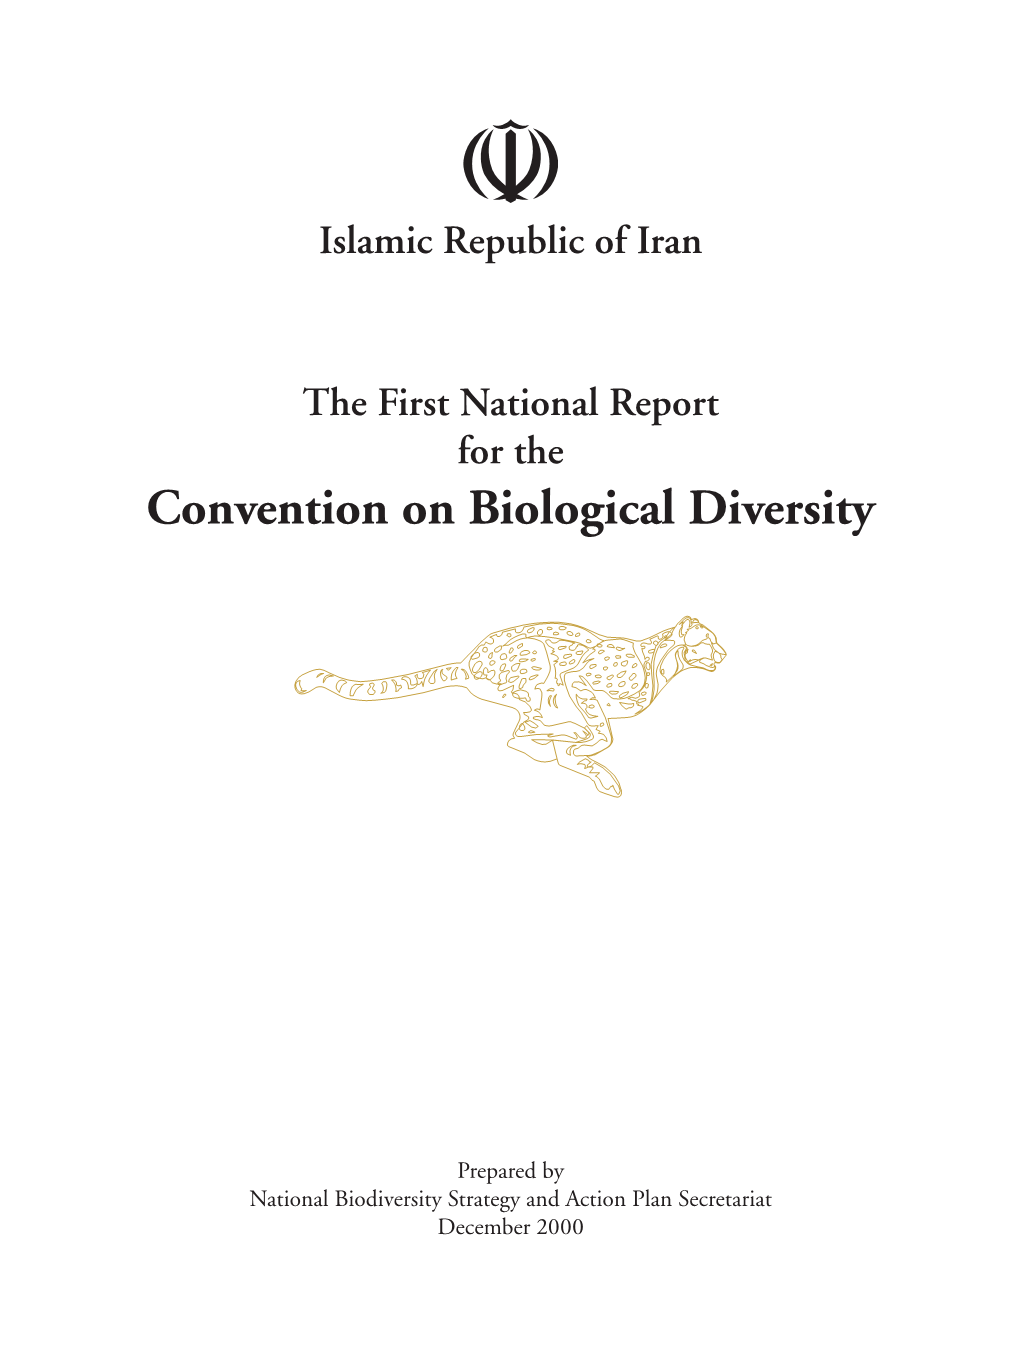 The First National Report for the Convention on Biological Diversity